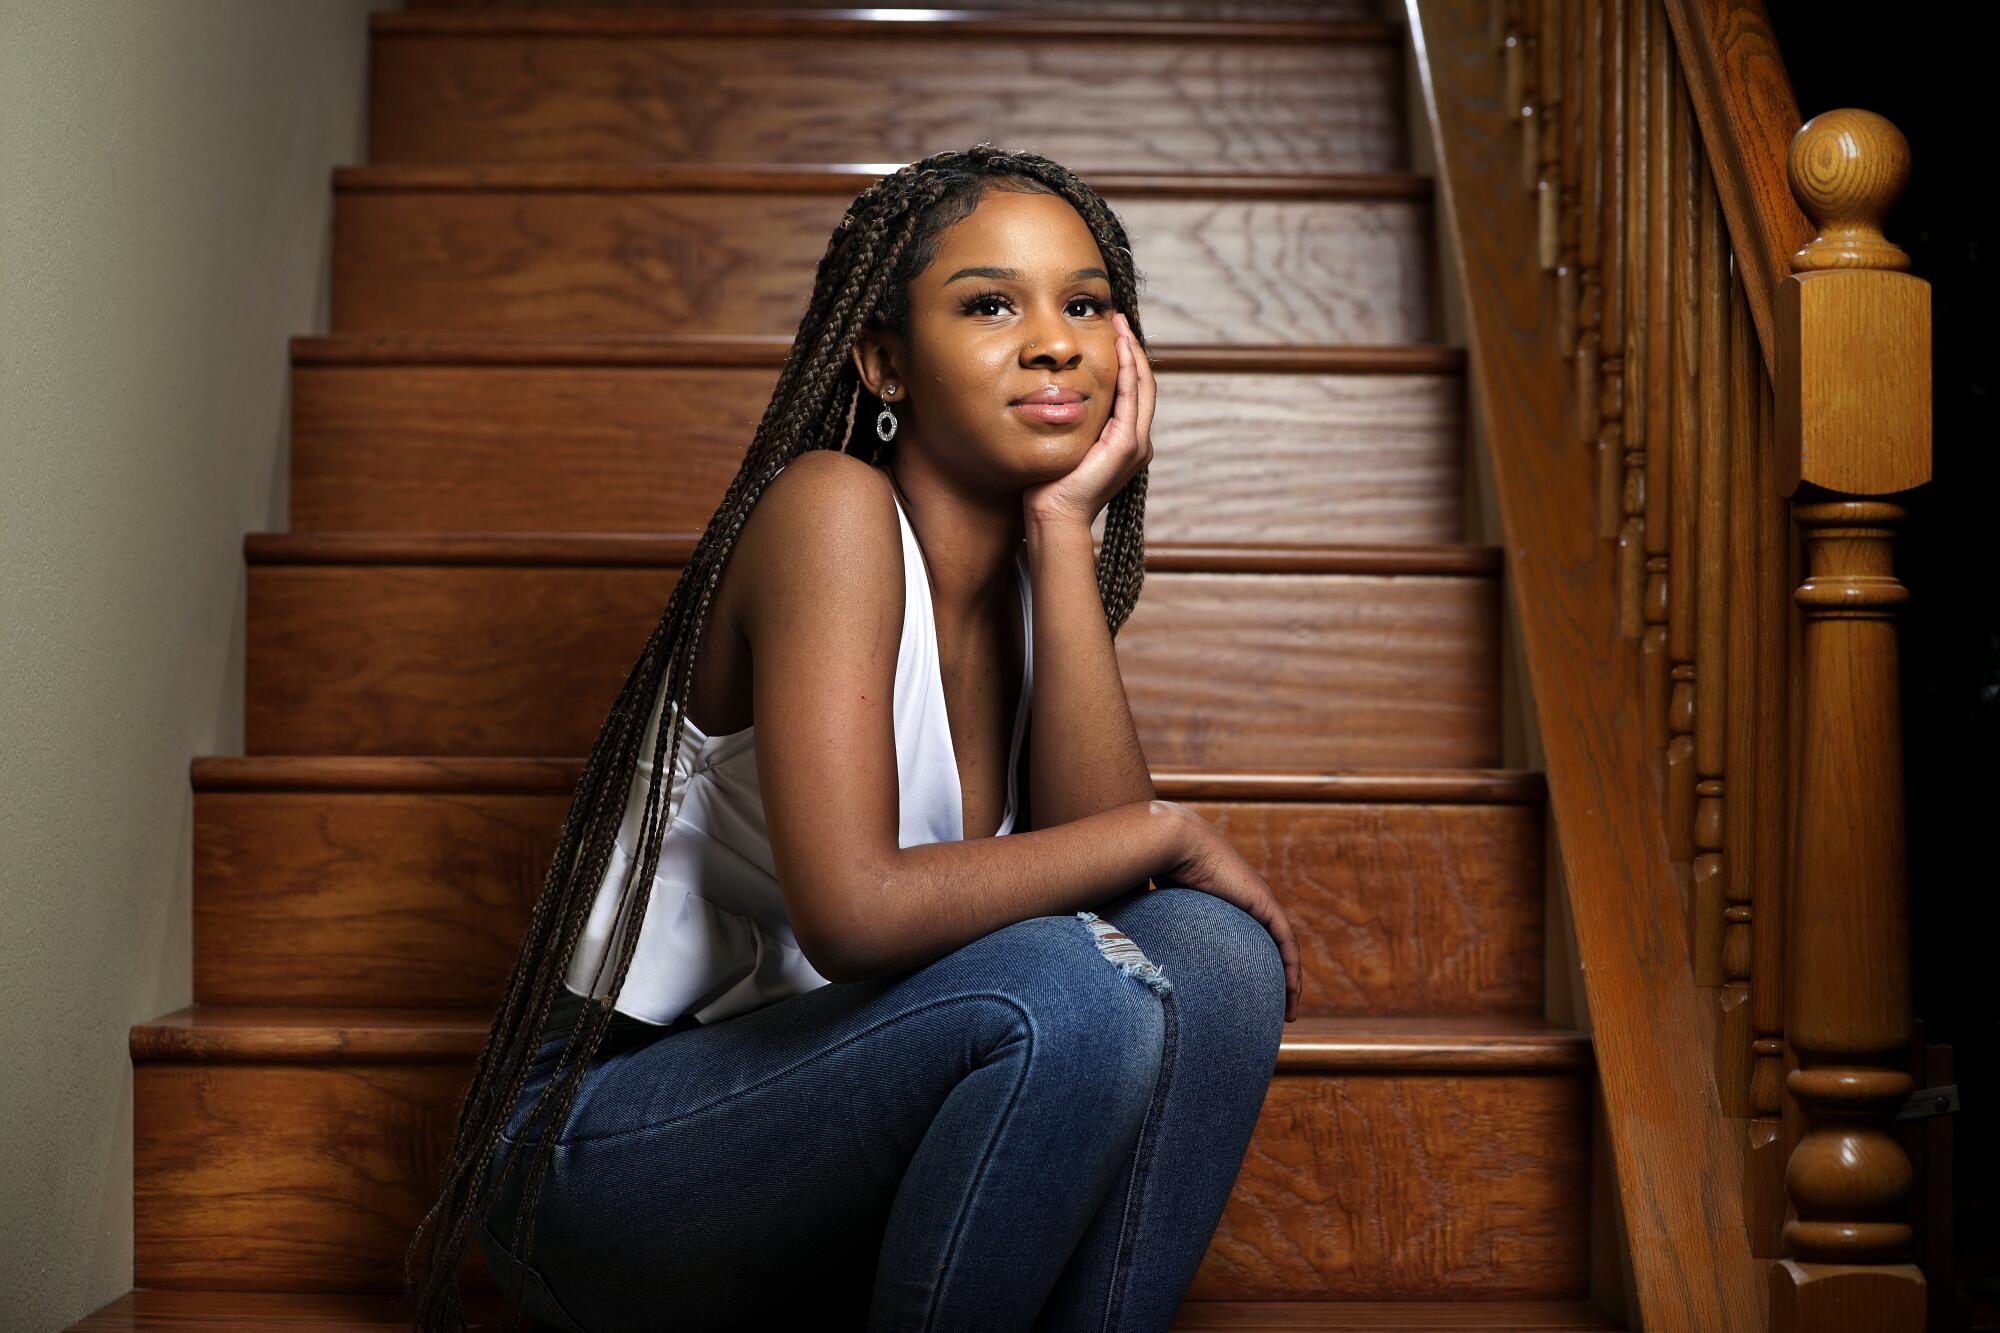 A young woman poses thoughtfully on hallway stairs.